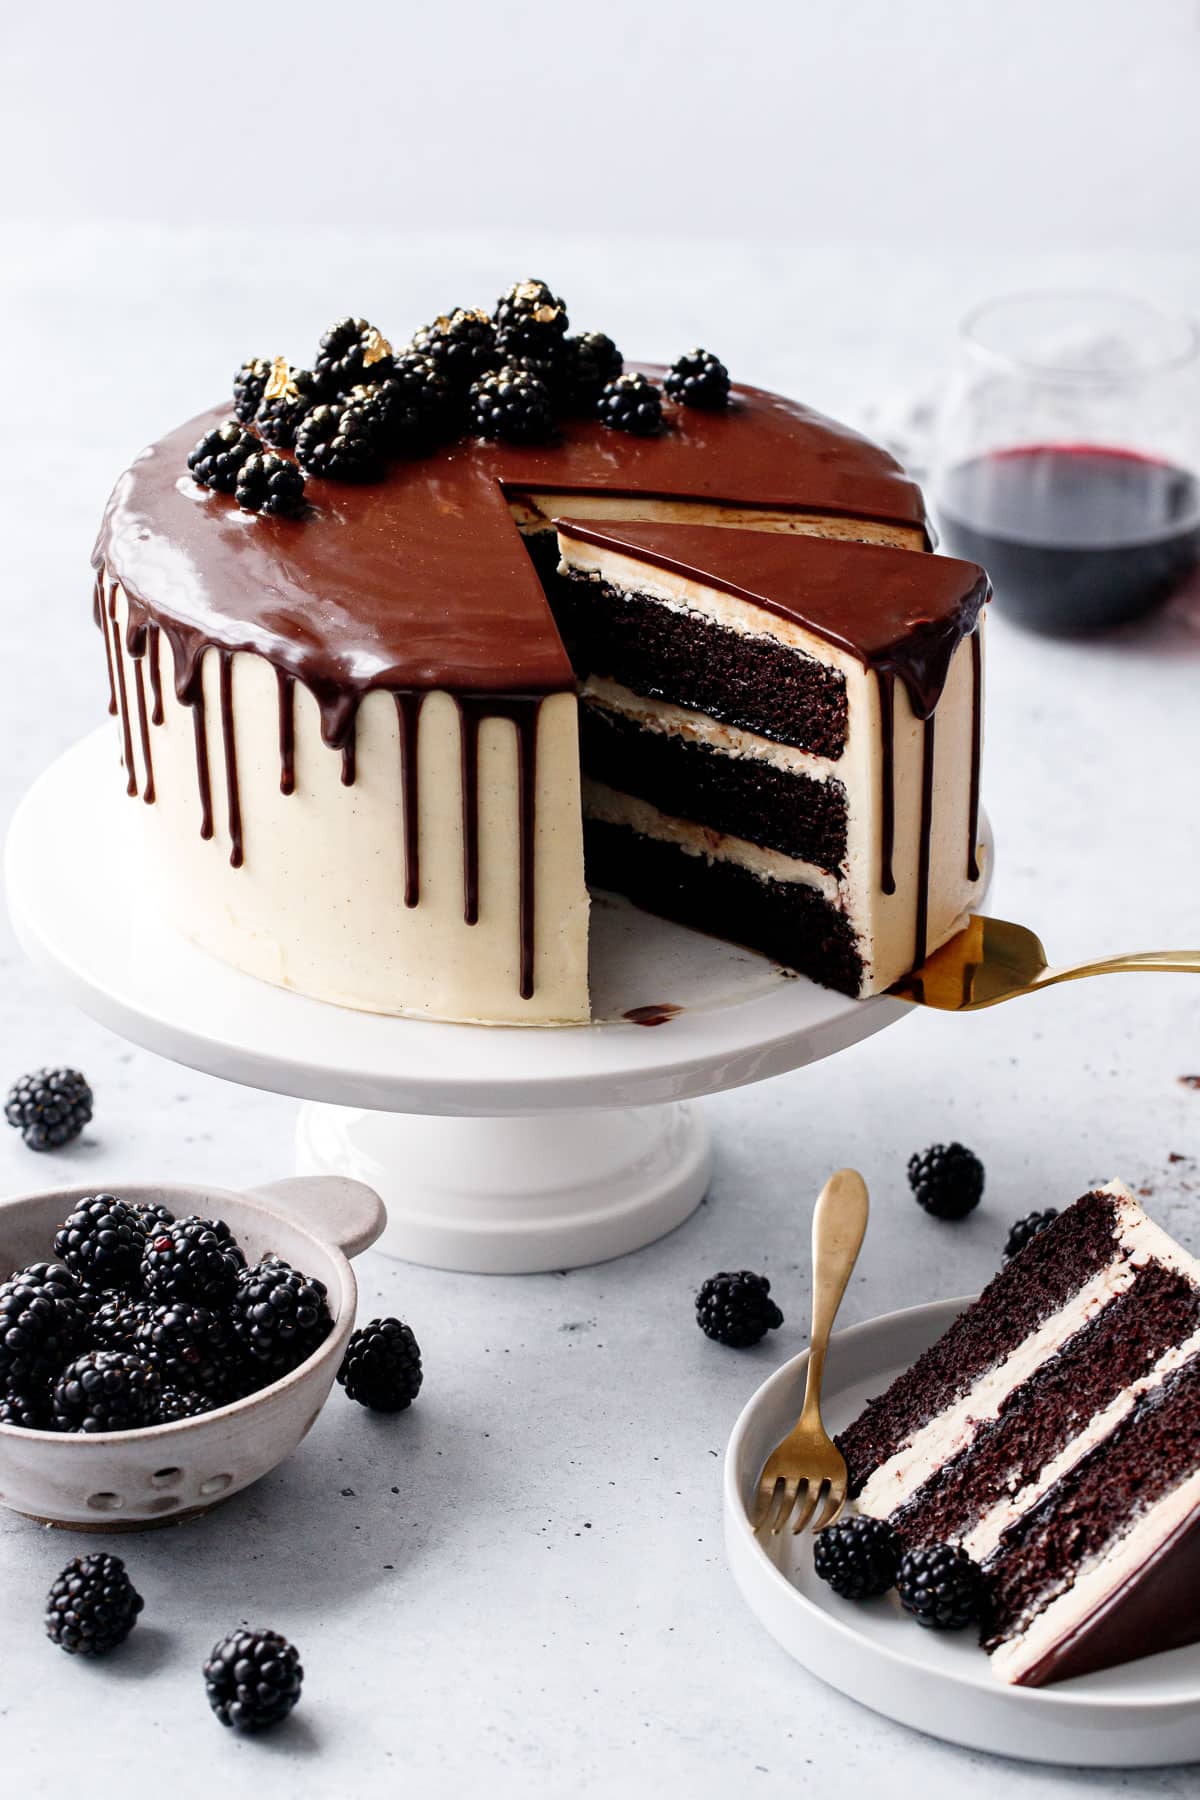 Sliced Blackberry Red Wine Chocolate Cake on a white cake stand, one slice on a plate to the side with a bowl of fresh blackberries, glass of red wine in the background.